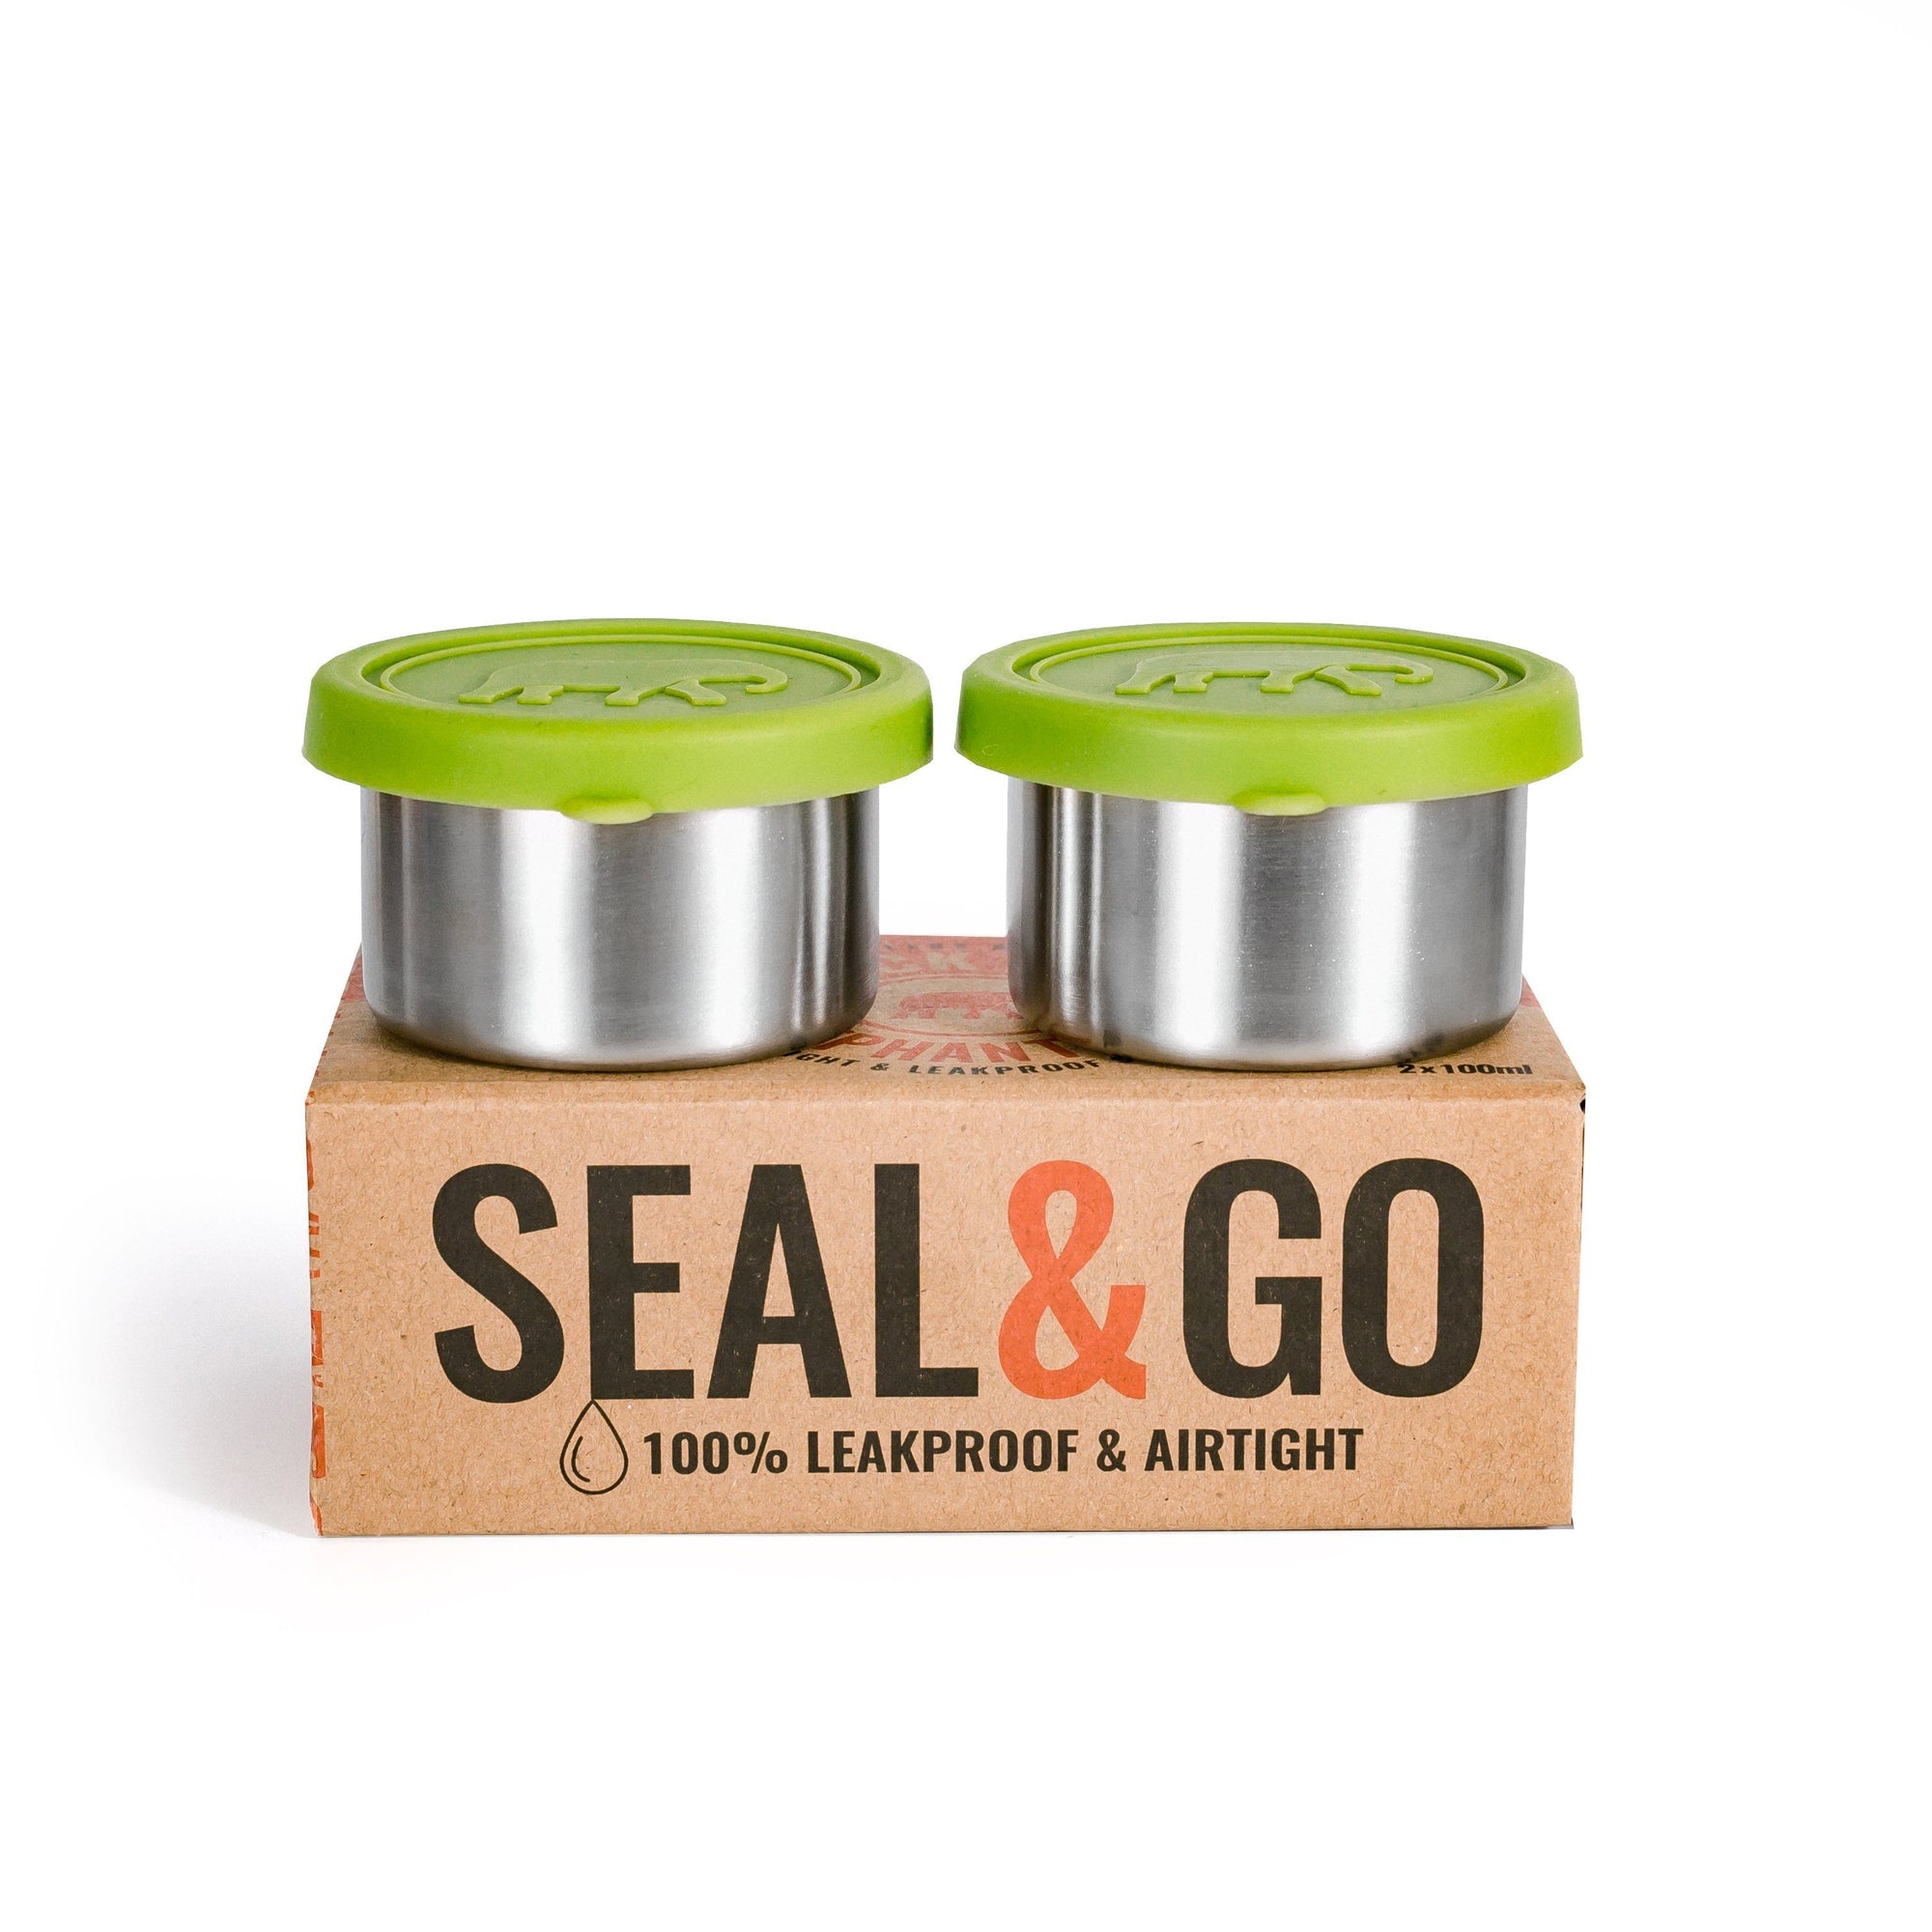 Seal & Go Stainless Steel Snack Pots - 2 x 100ml Elephant Box 